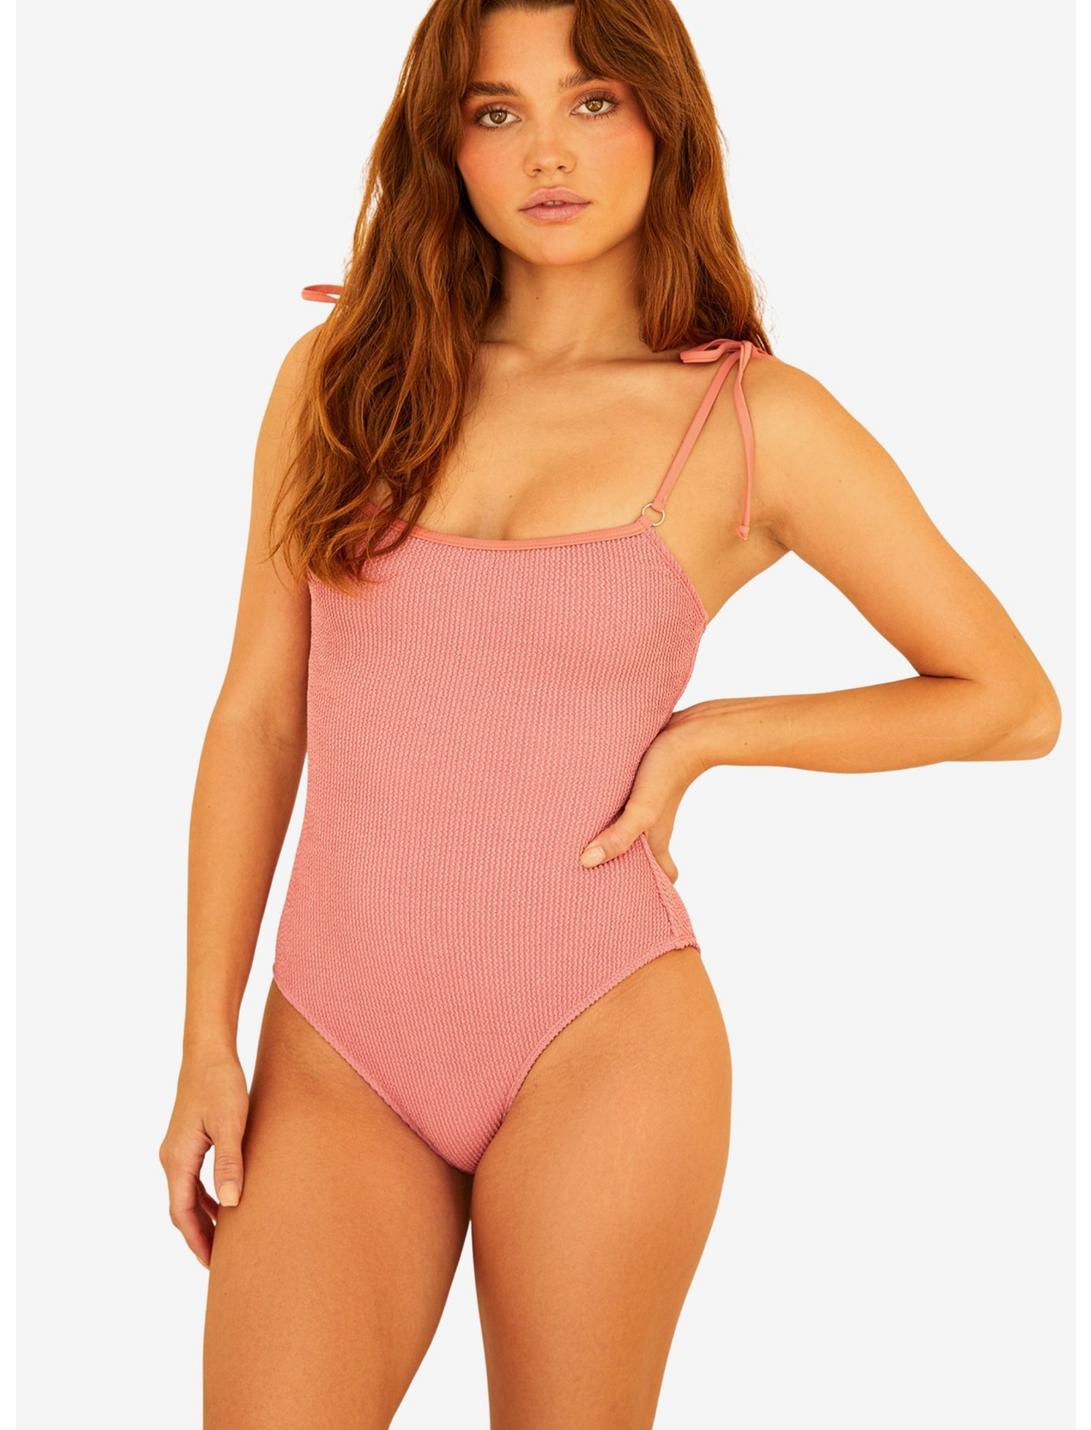 Dippin' Daisy's Astrid One Piece Pink, PINK, hi-res